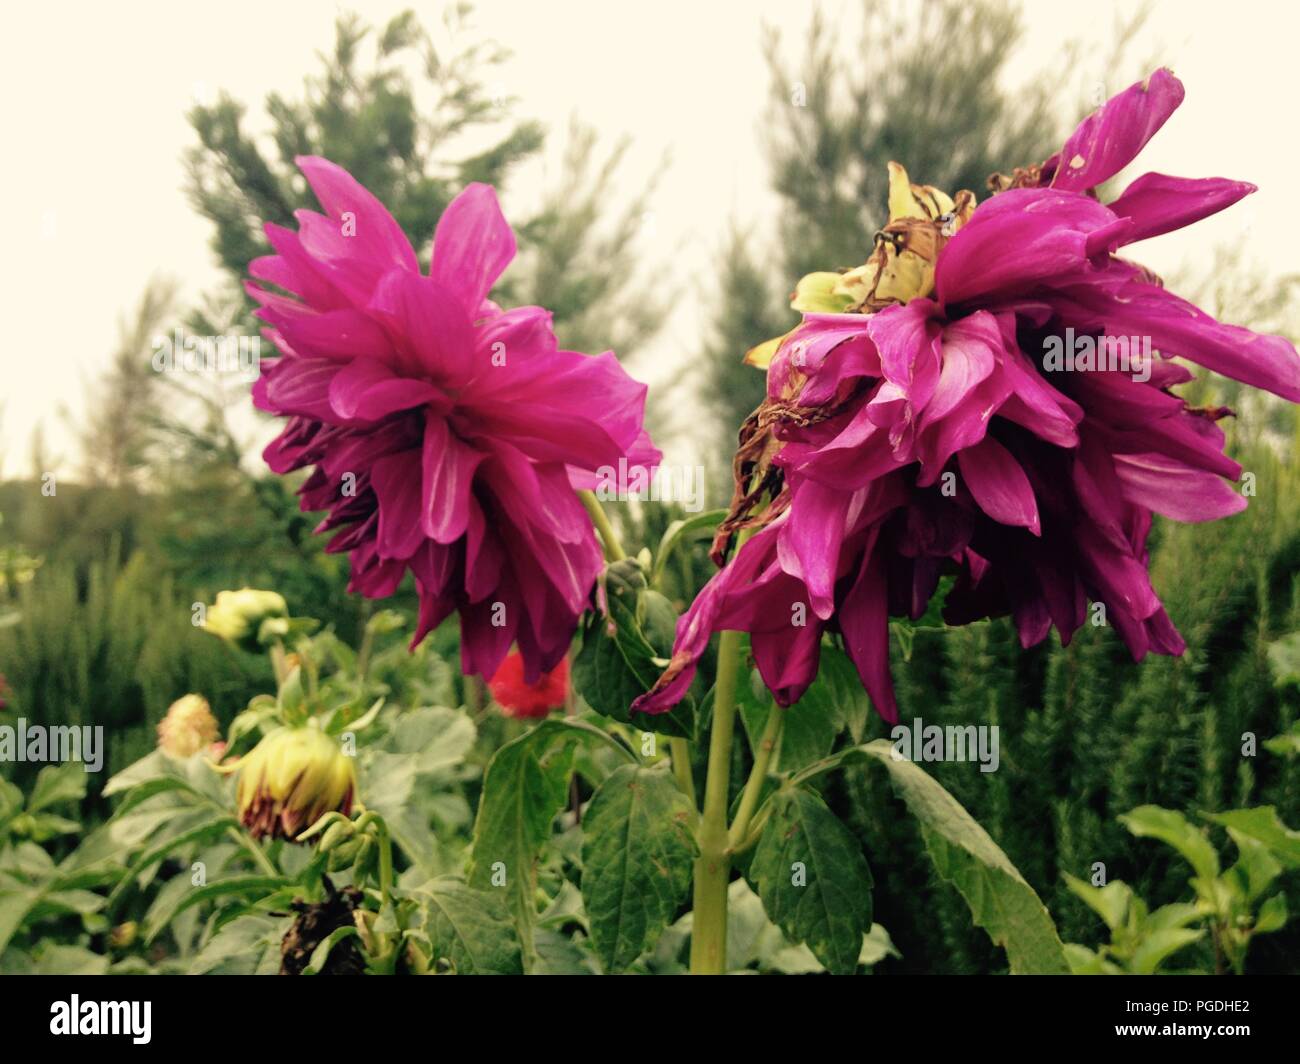 Close-up of red flowering plant. Guadalajara, Jalisco. Mexico Stock Photo